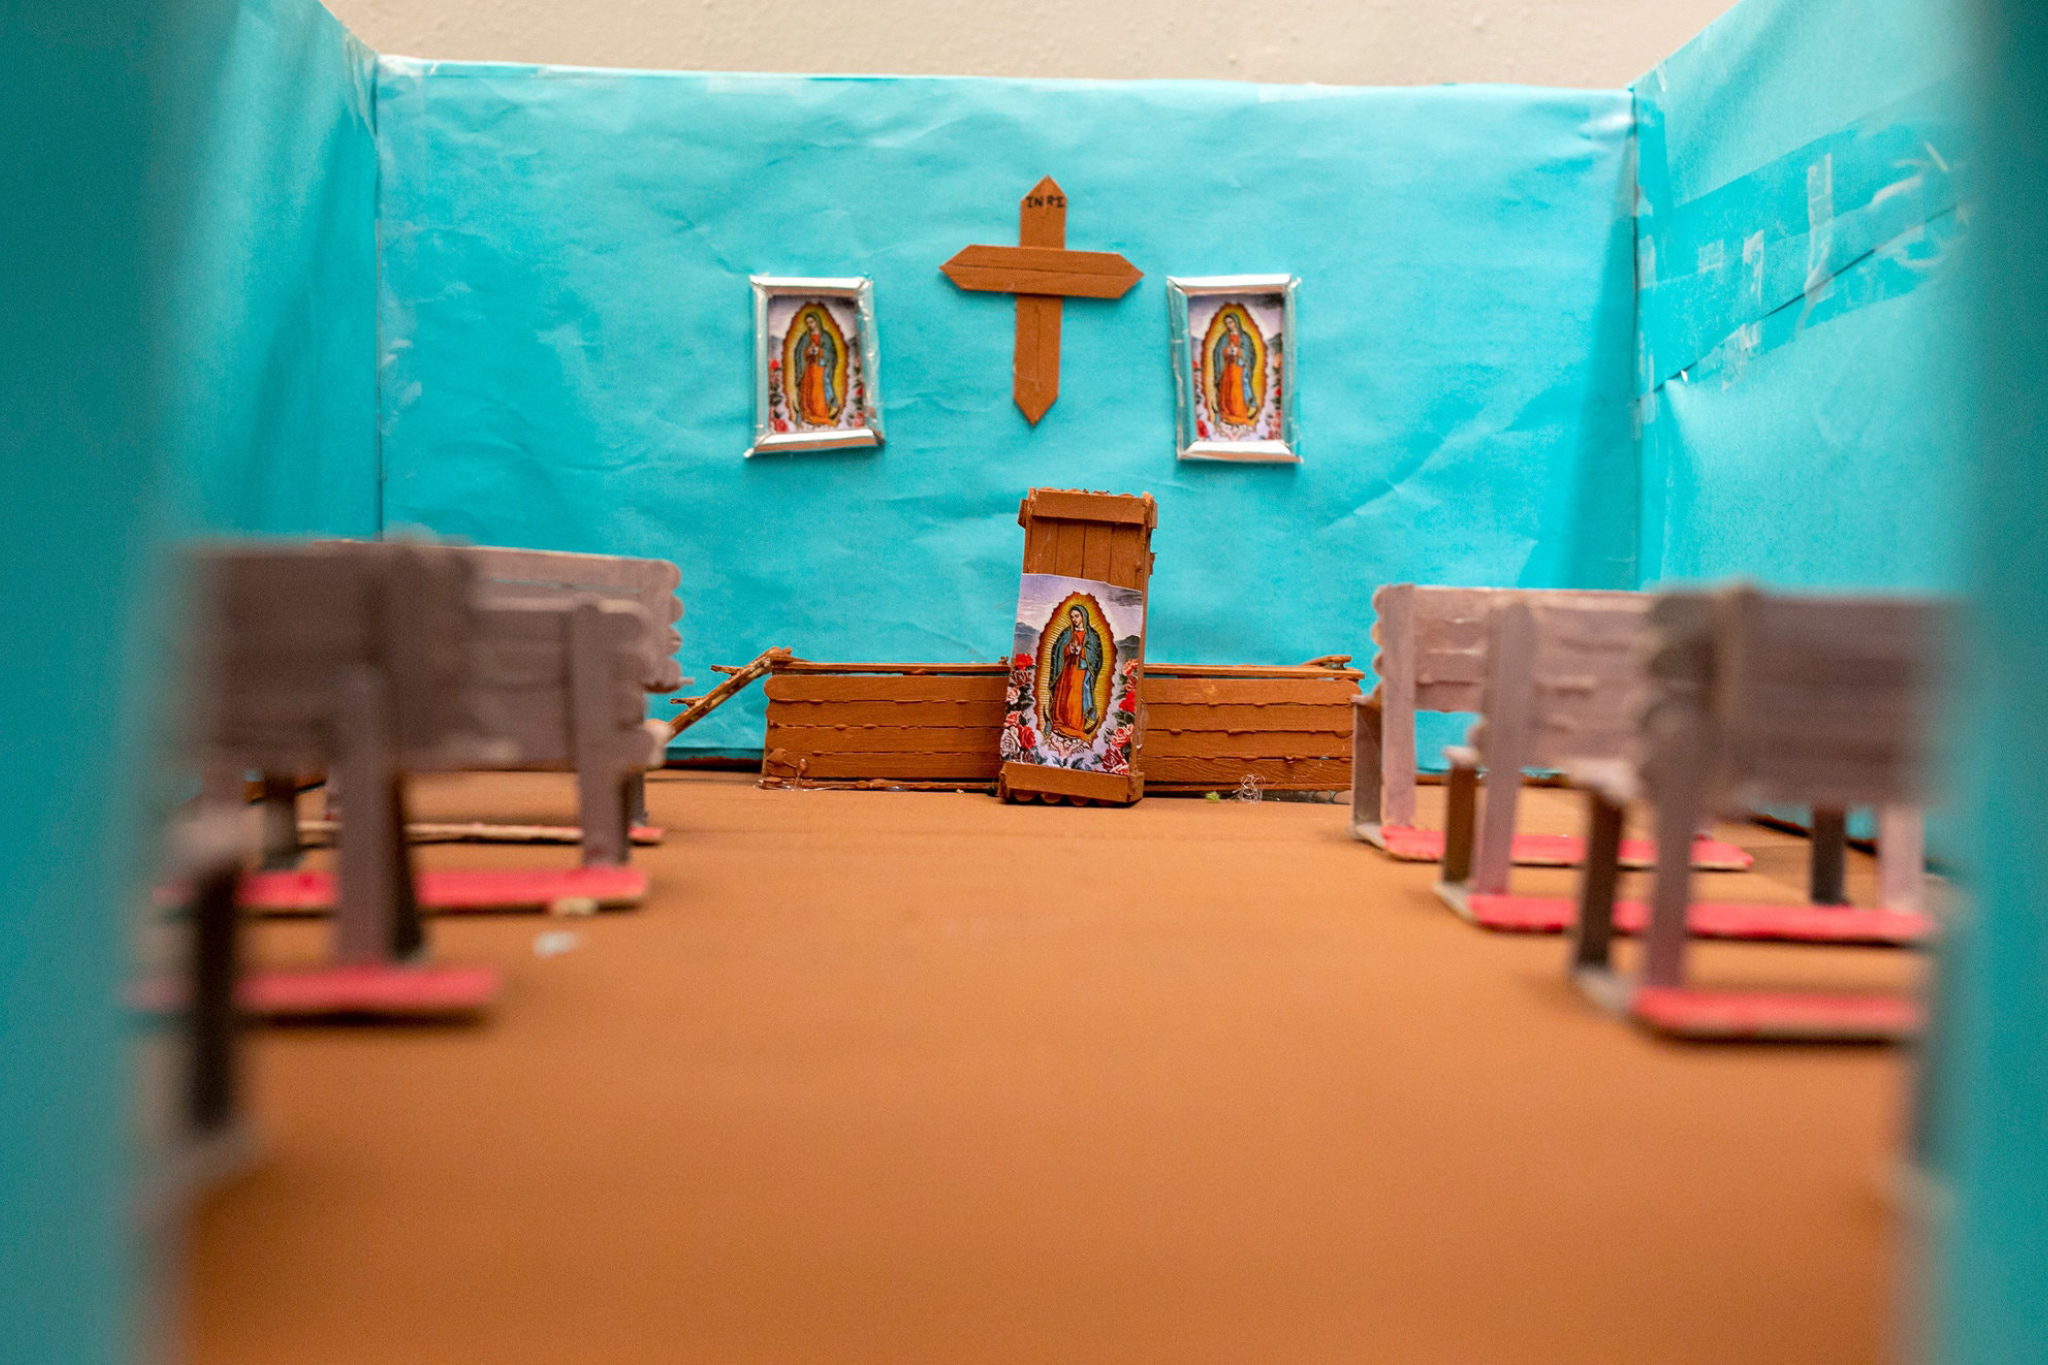 A cut-cardboard cathedral made by a teen at Tornillo is wrapped in vibrant aqua tissue paper, with pews for the faithful made from Popsicle sticks. Photo by Ivan Pierre Aguirre